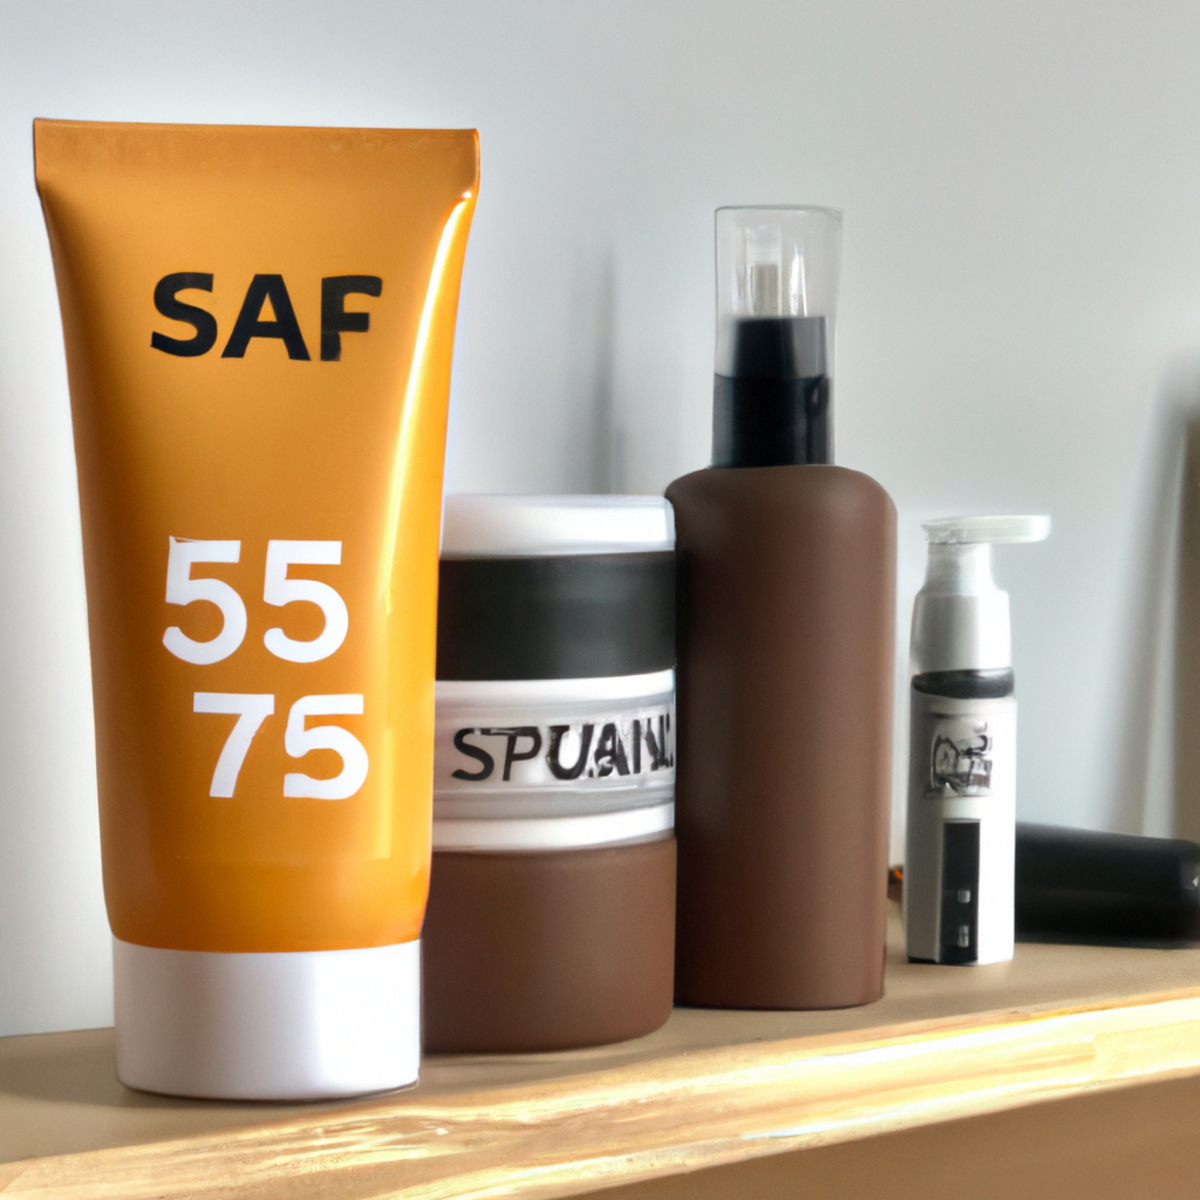 Get ready to glow, fellas! Elevate your grooming game with these natural skin care routines that will have you looking and feeling your best. From SPF 50+ to moisturizer and eye cream, this wooden shelf has got you covered. Don't let harmful UV rays dull your shine - make skin care a priority and let your natural radiance shine through.